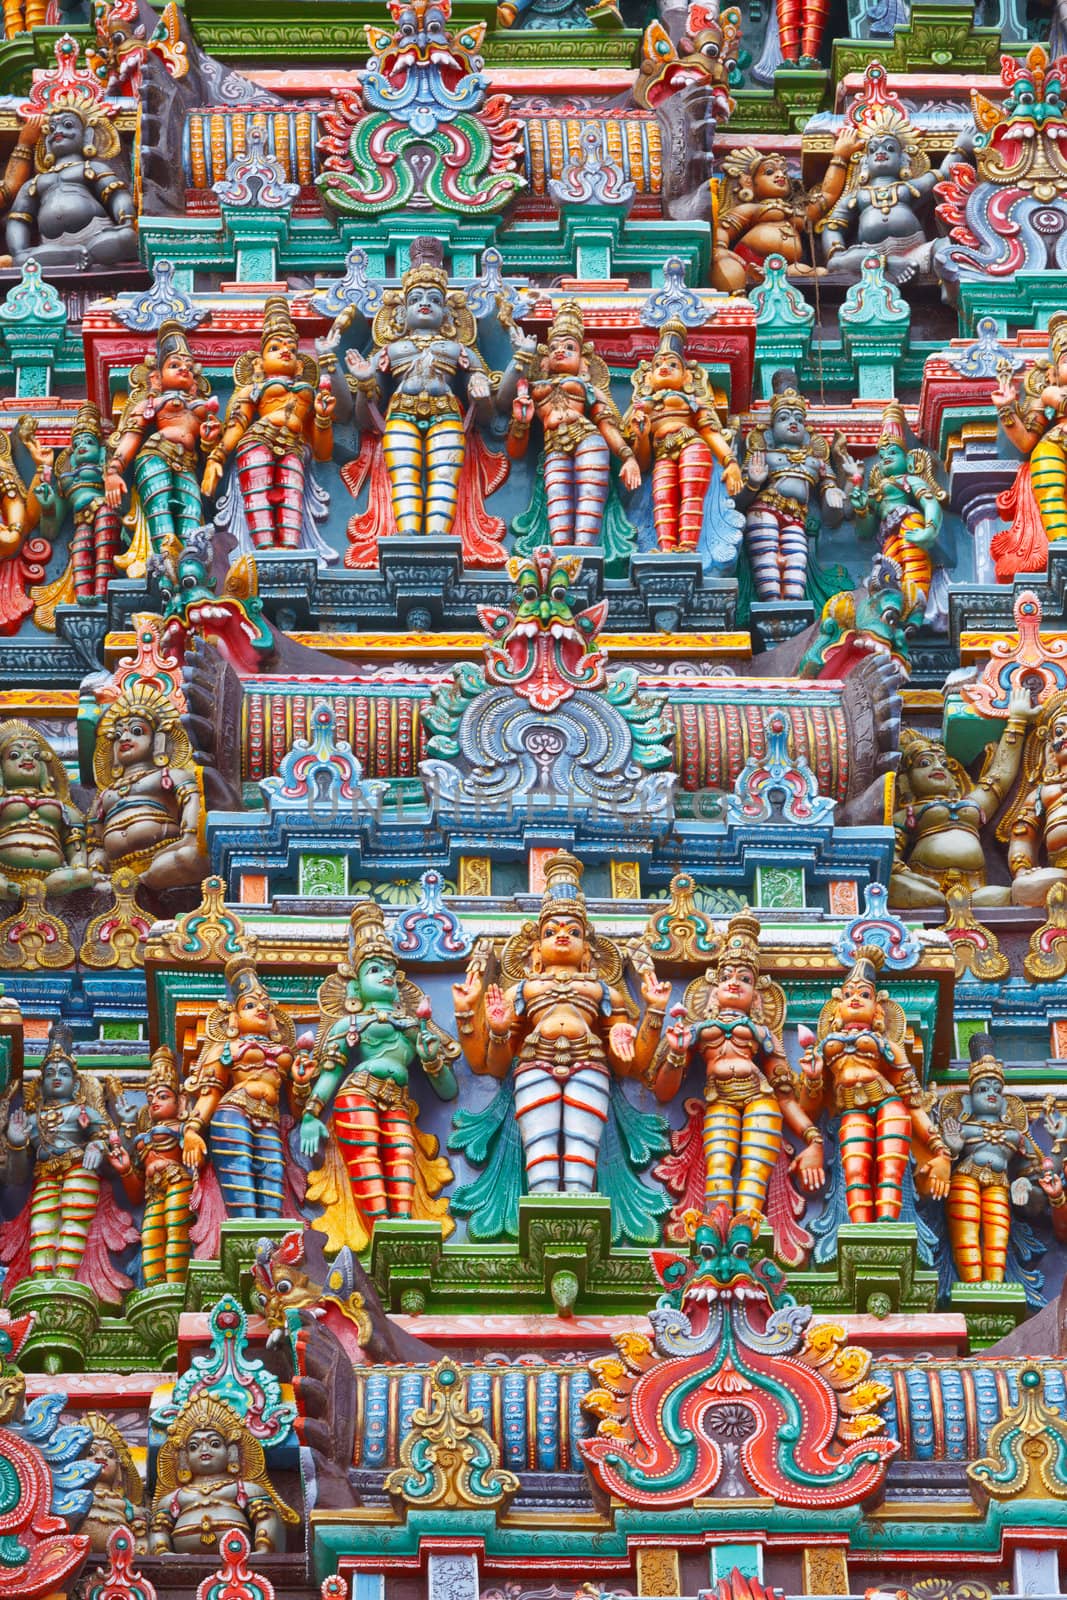 Sculptures on Hindu temple tower by dimol